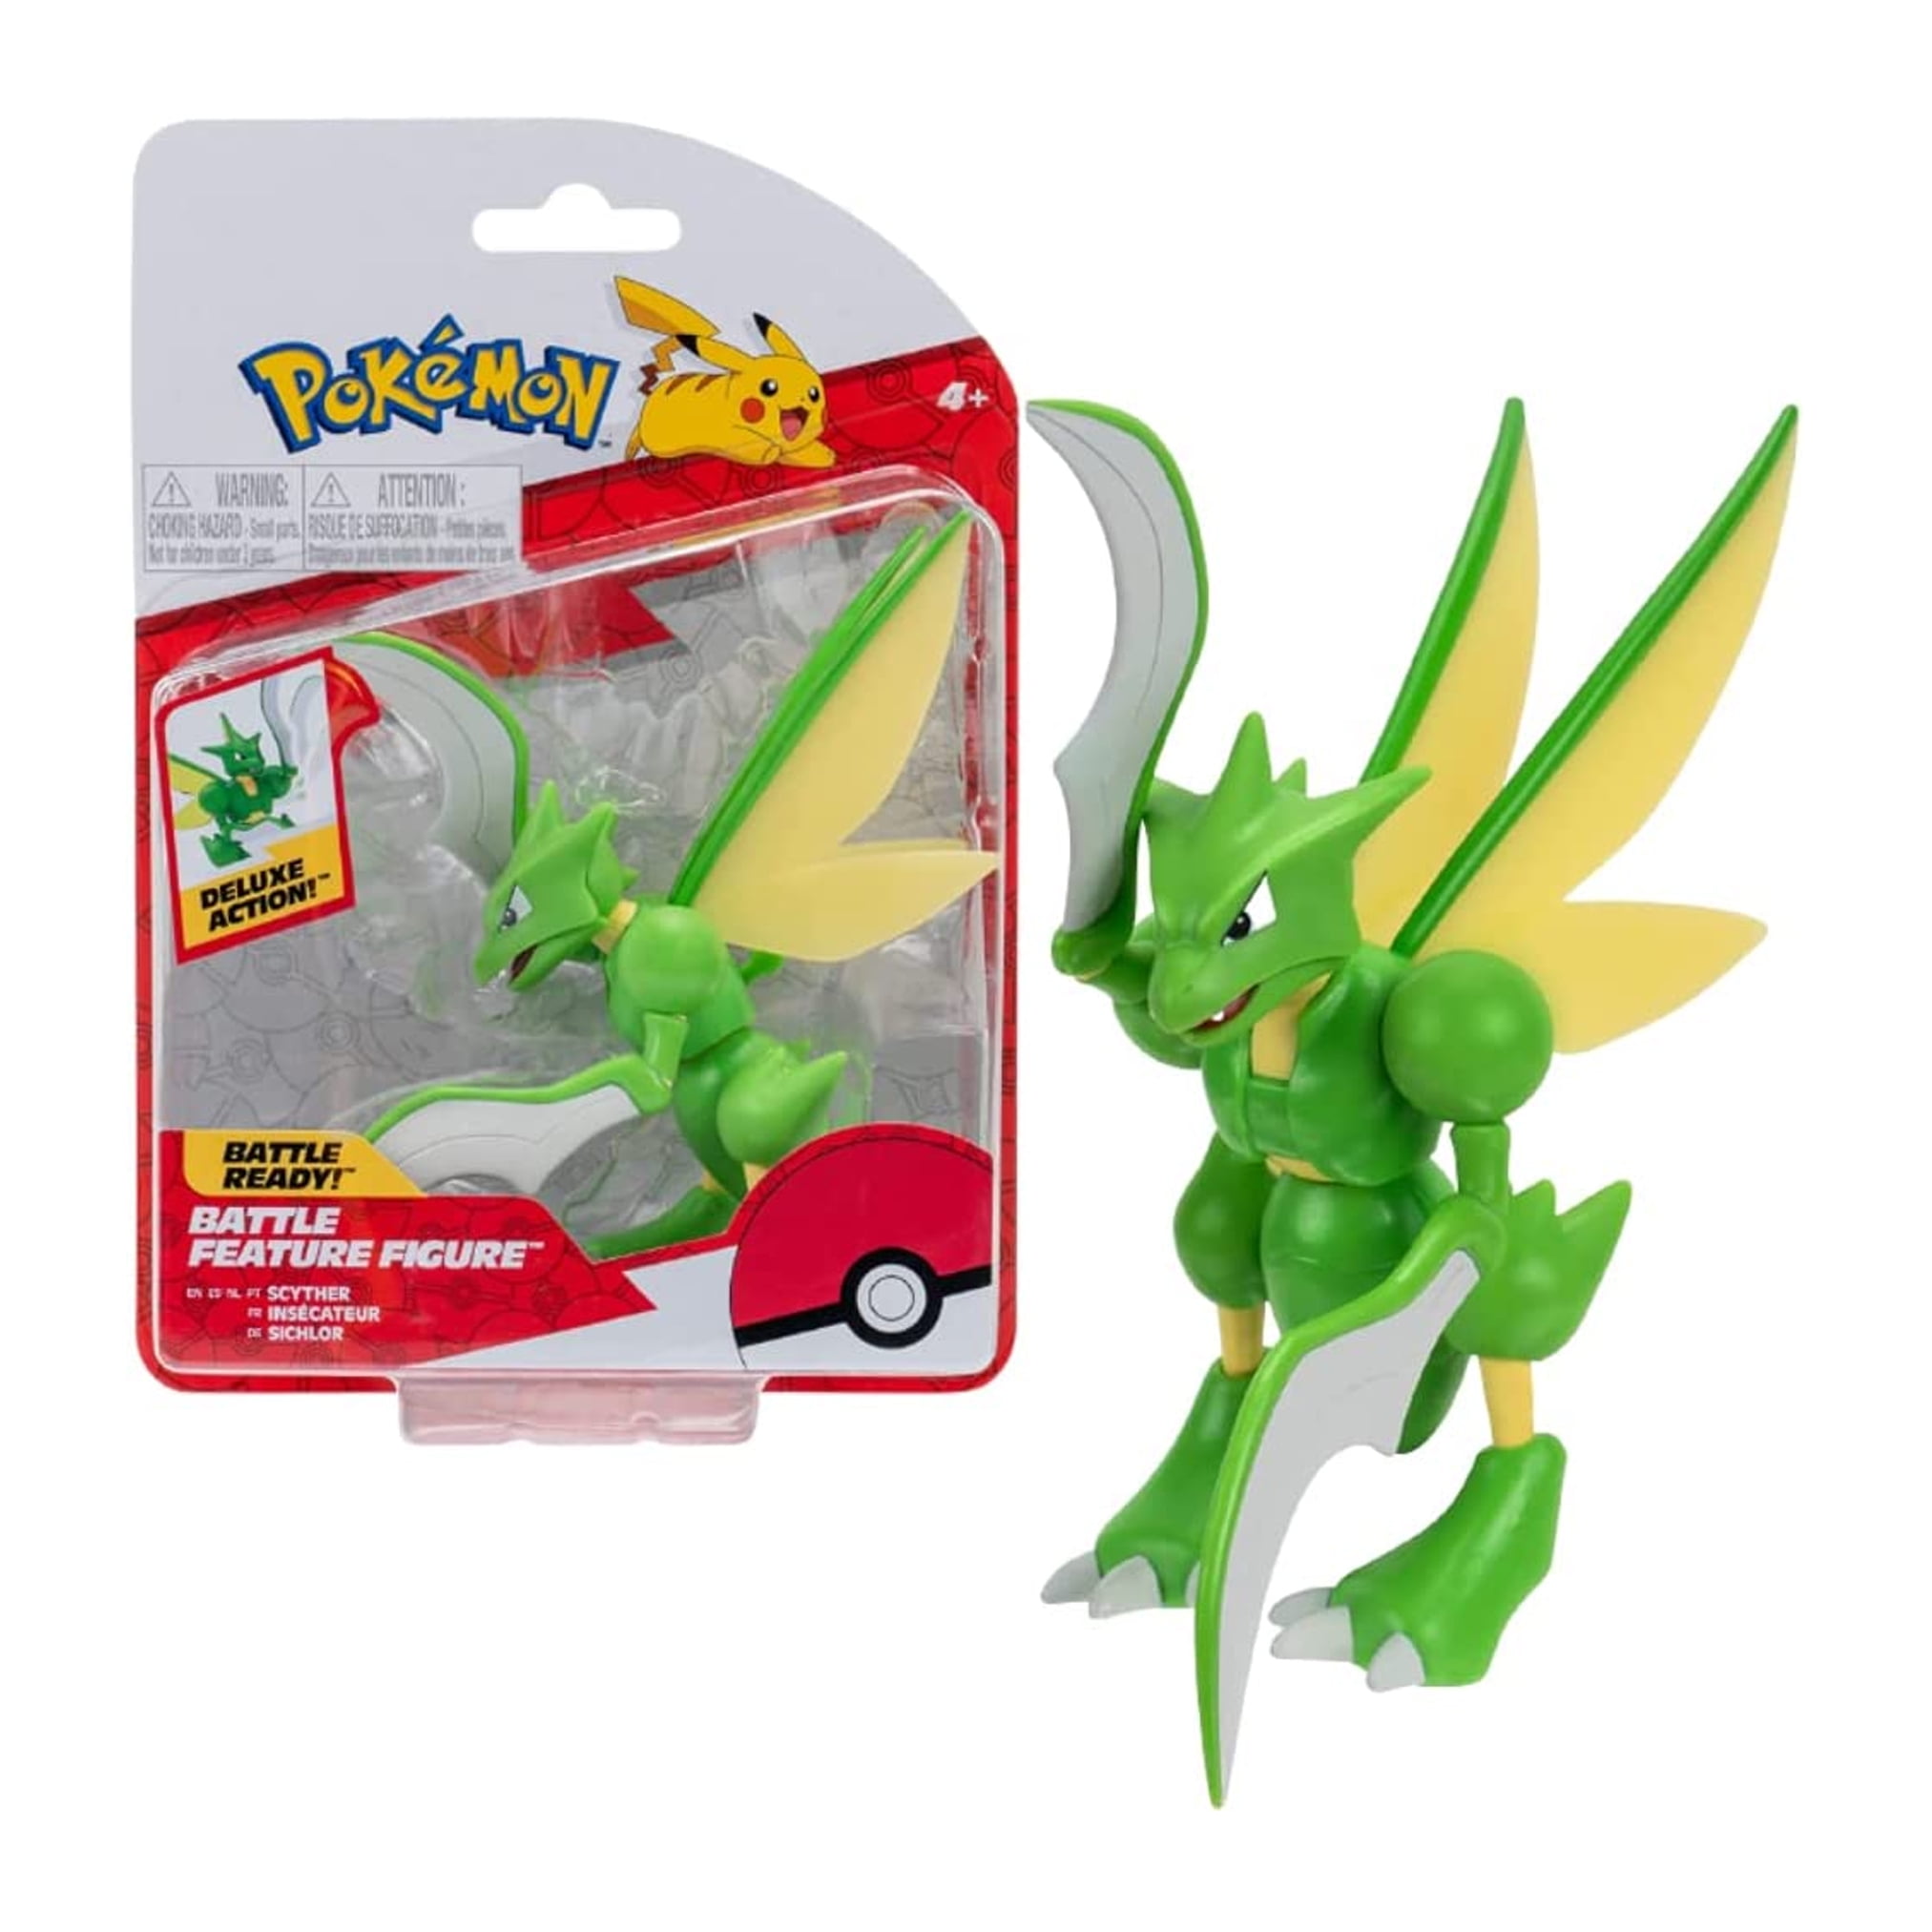 Pokemon 4.5 Inch Scyther Battle Figure with Chop Attack Arms, Multi 